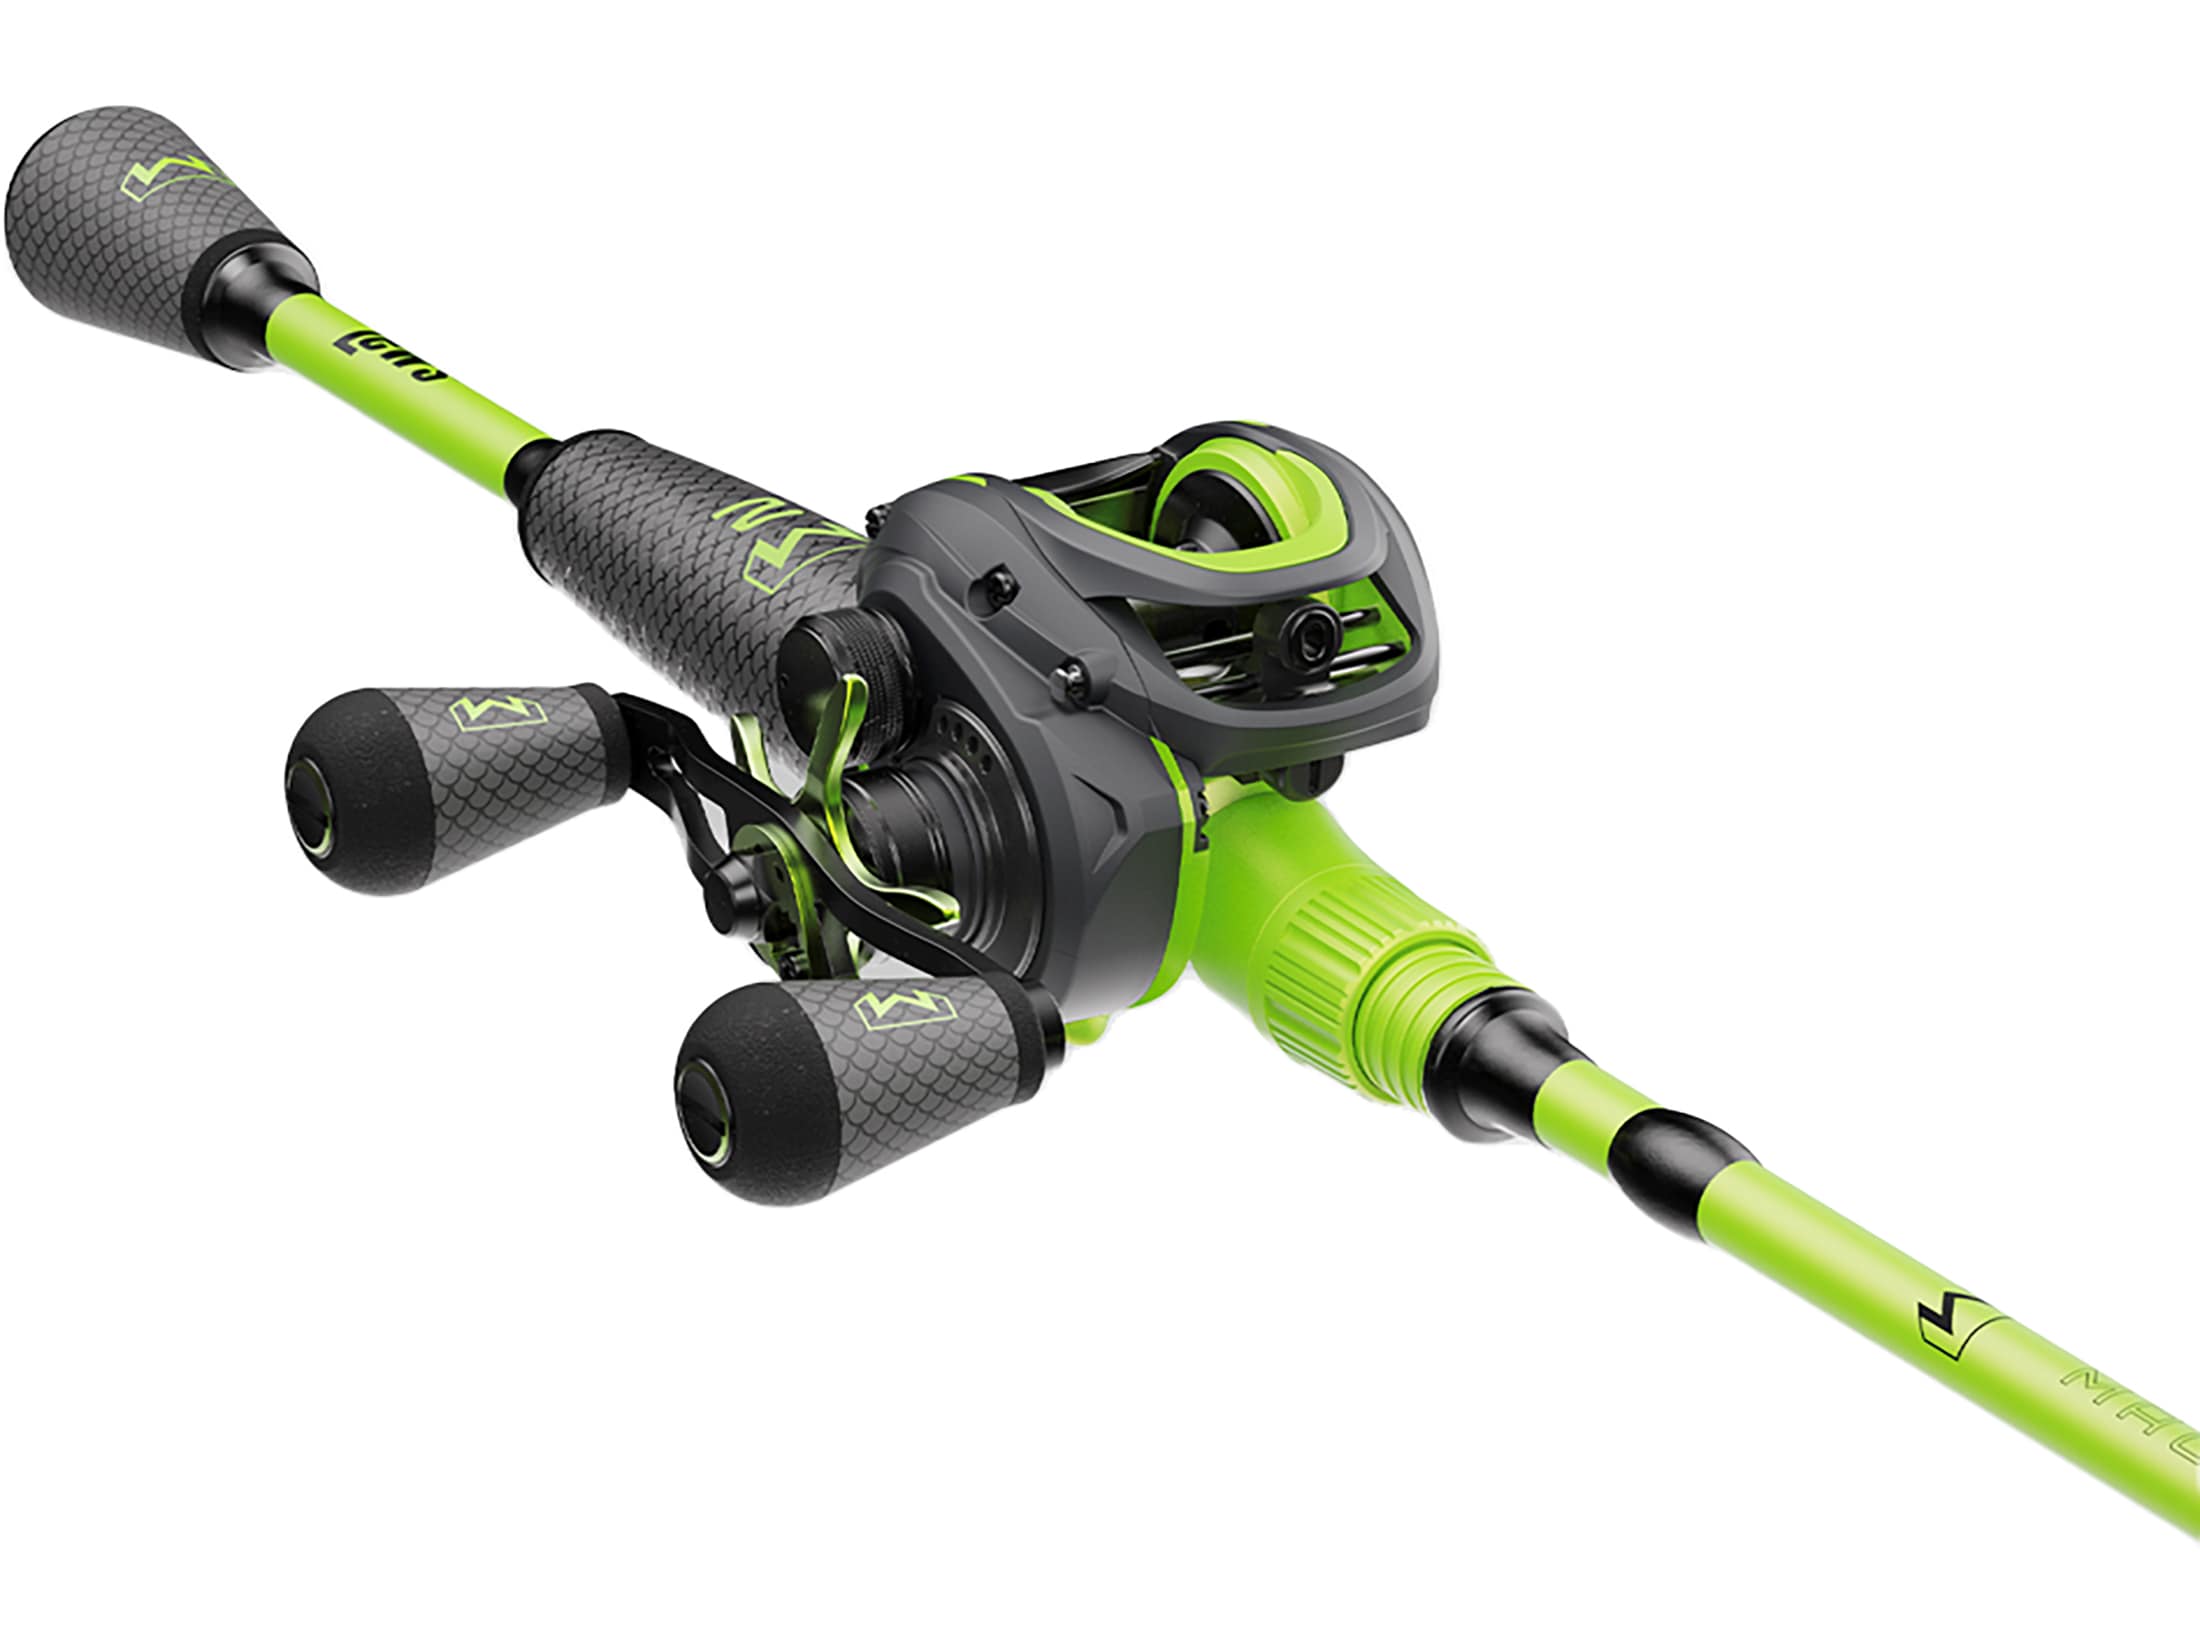 Lew's Mach 2 Baitcast raises the bar in looks and performance of a